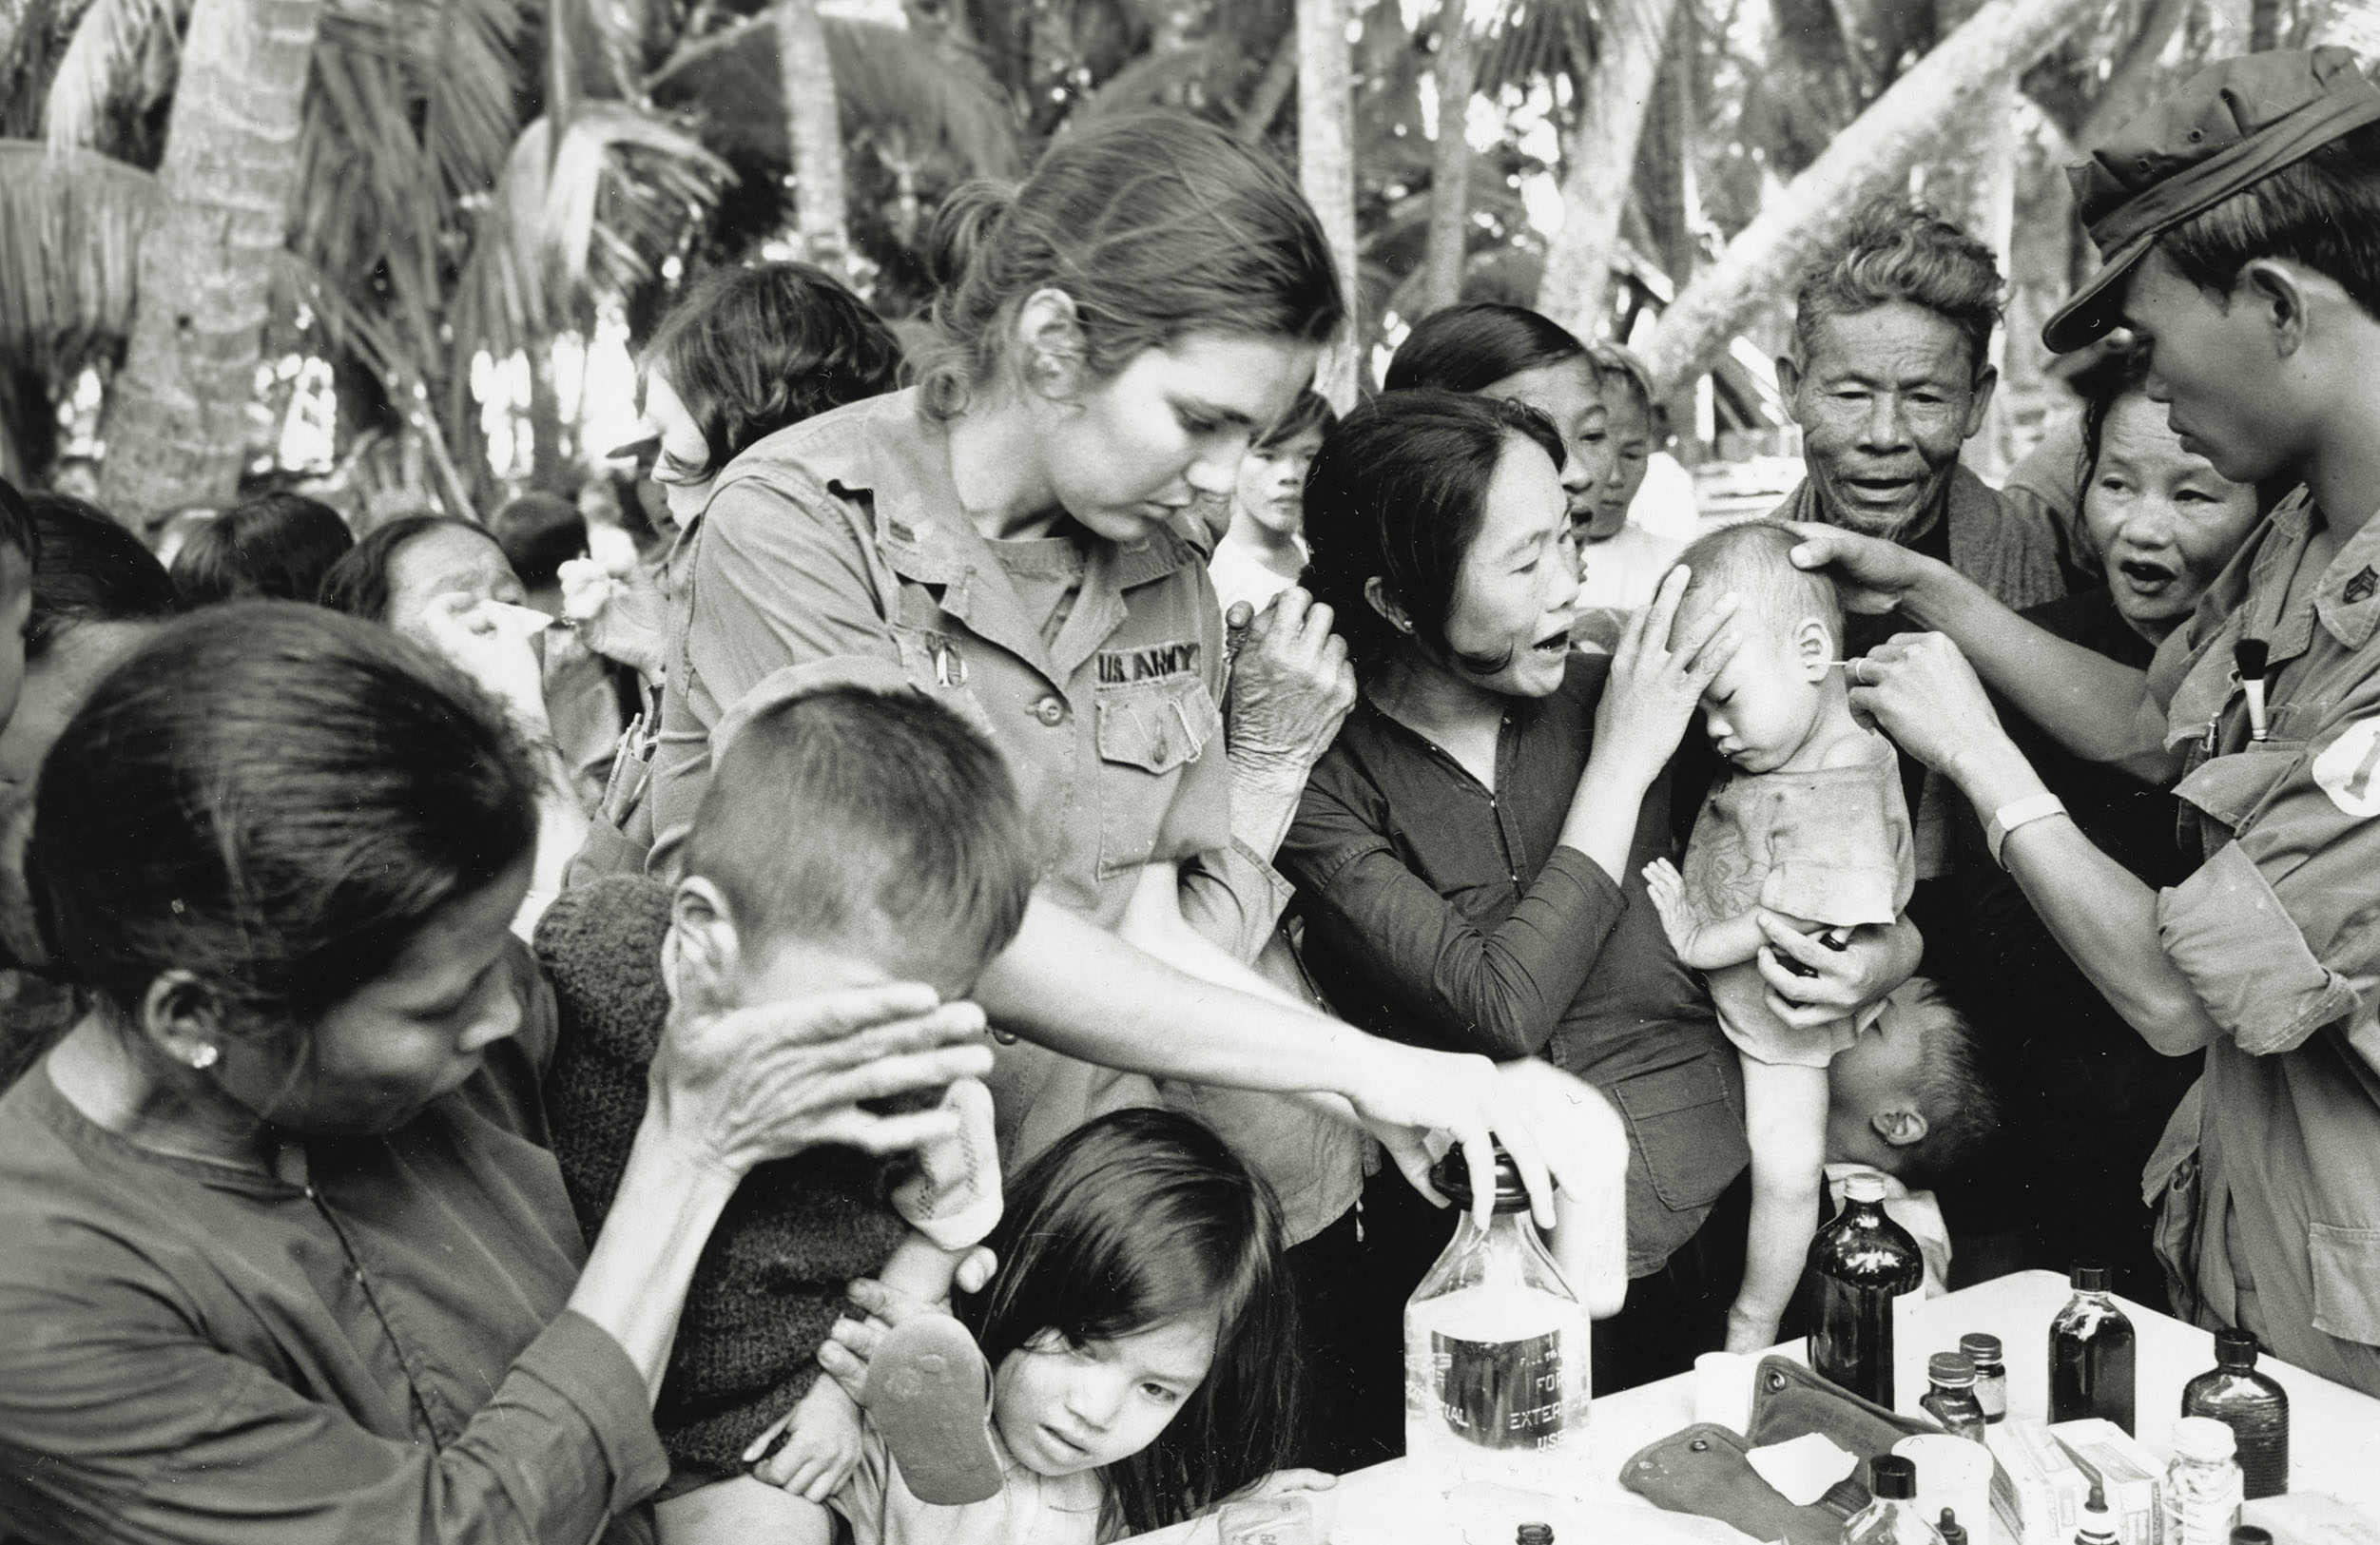 In an example of the widespread reach of U.S. military health services, Lt. Mary Huepers opens a bottle of alcohol to treat a Vietnamese villager during a MEDCAP visit to Ky Hoa Island off the coast of South Vietnam on Nov. 28, 1969. / AP